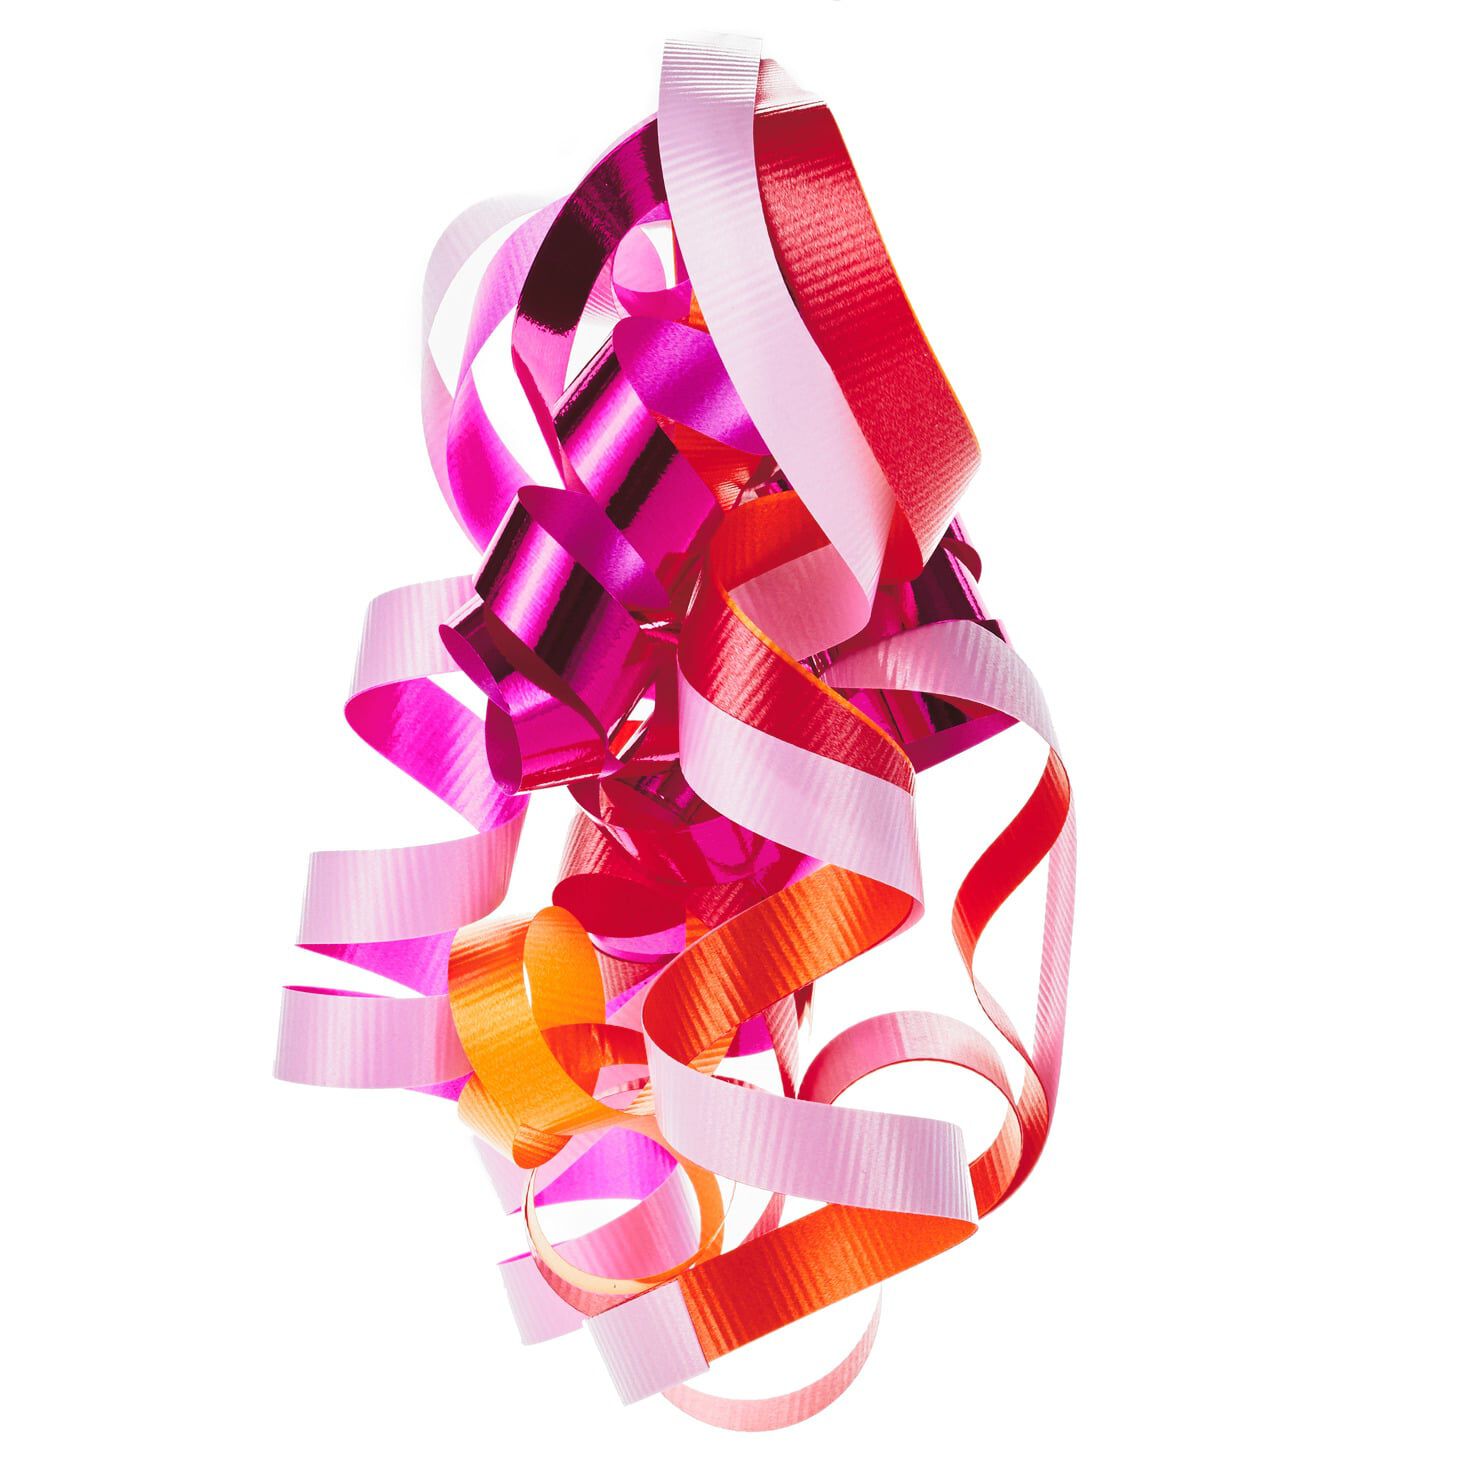 https://www.hallmark.com/dw/image/v2/AALB_PRD/on/demandware.static/-/Sites-hallmark-master/default/dwc13e0939/images/finished-goods/Red-Orange-and-Pink-Curly-Ribbon-Gift-Bow_199RCA1164_01.jpg?sfrm=jpg